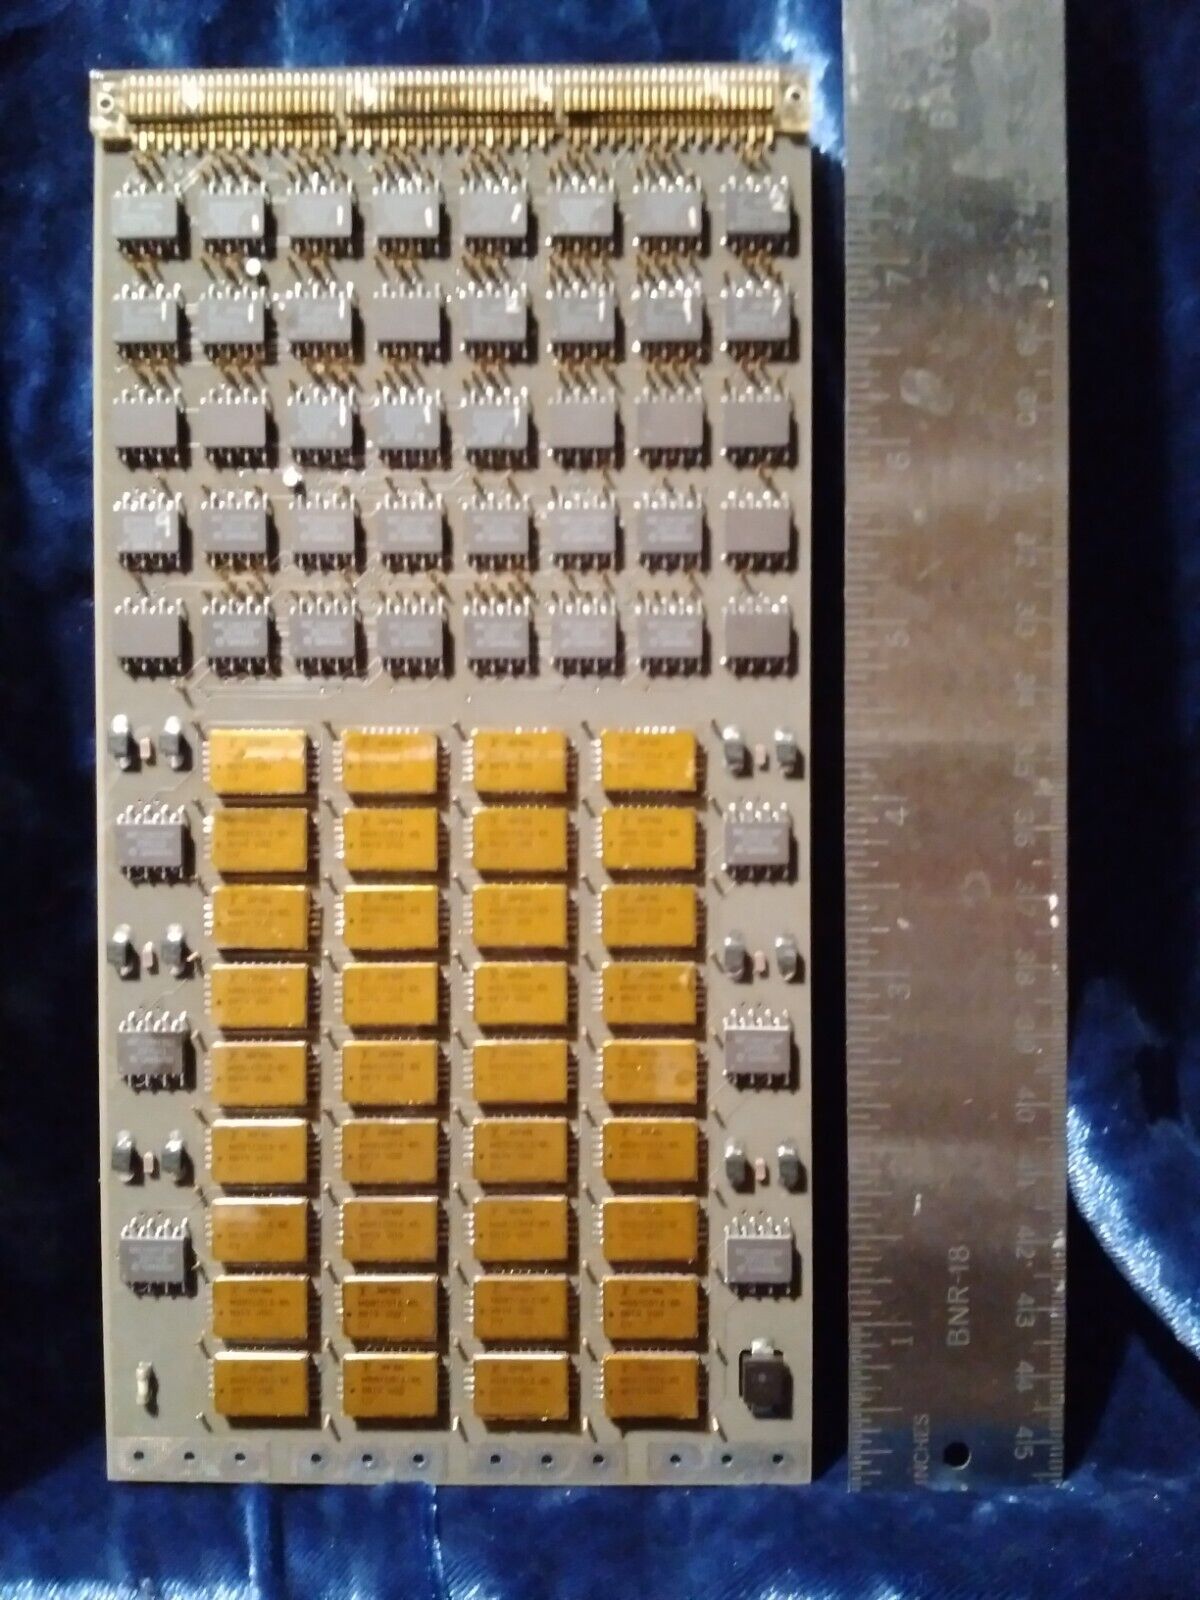 Cray-2 SuperComputer Board Memory.Small IC's Date Code is more recent than Large